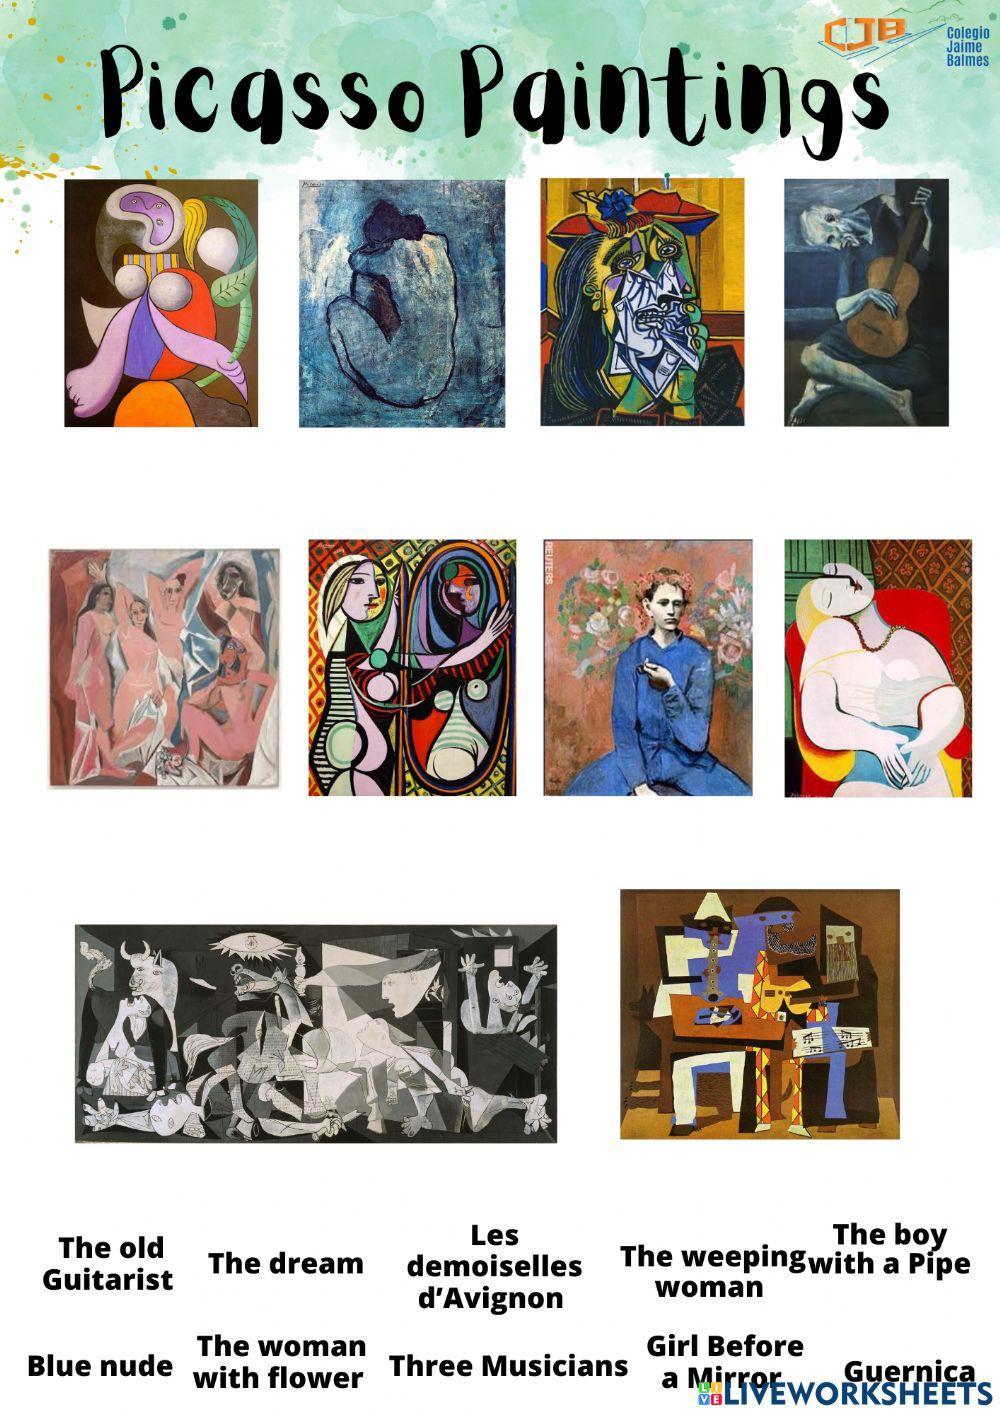 Picasso's Paintings